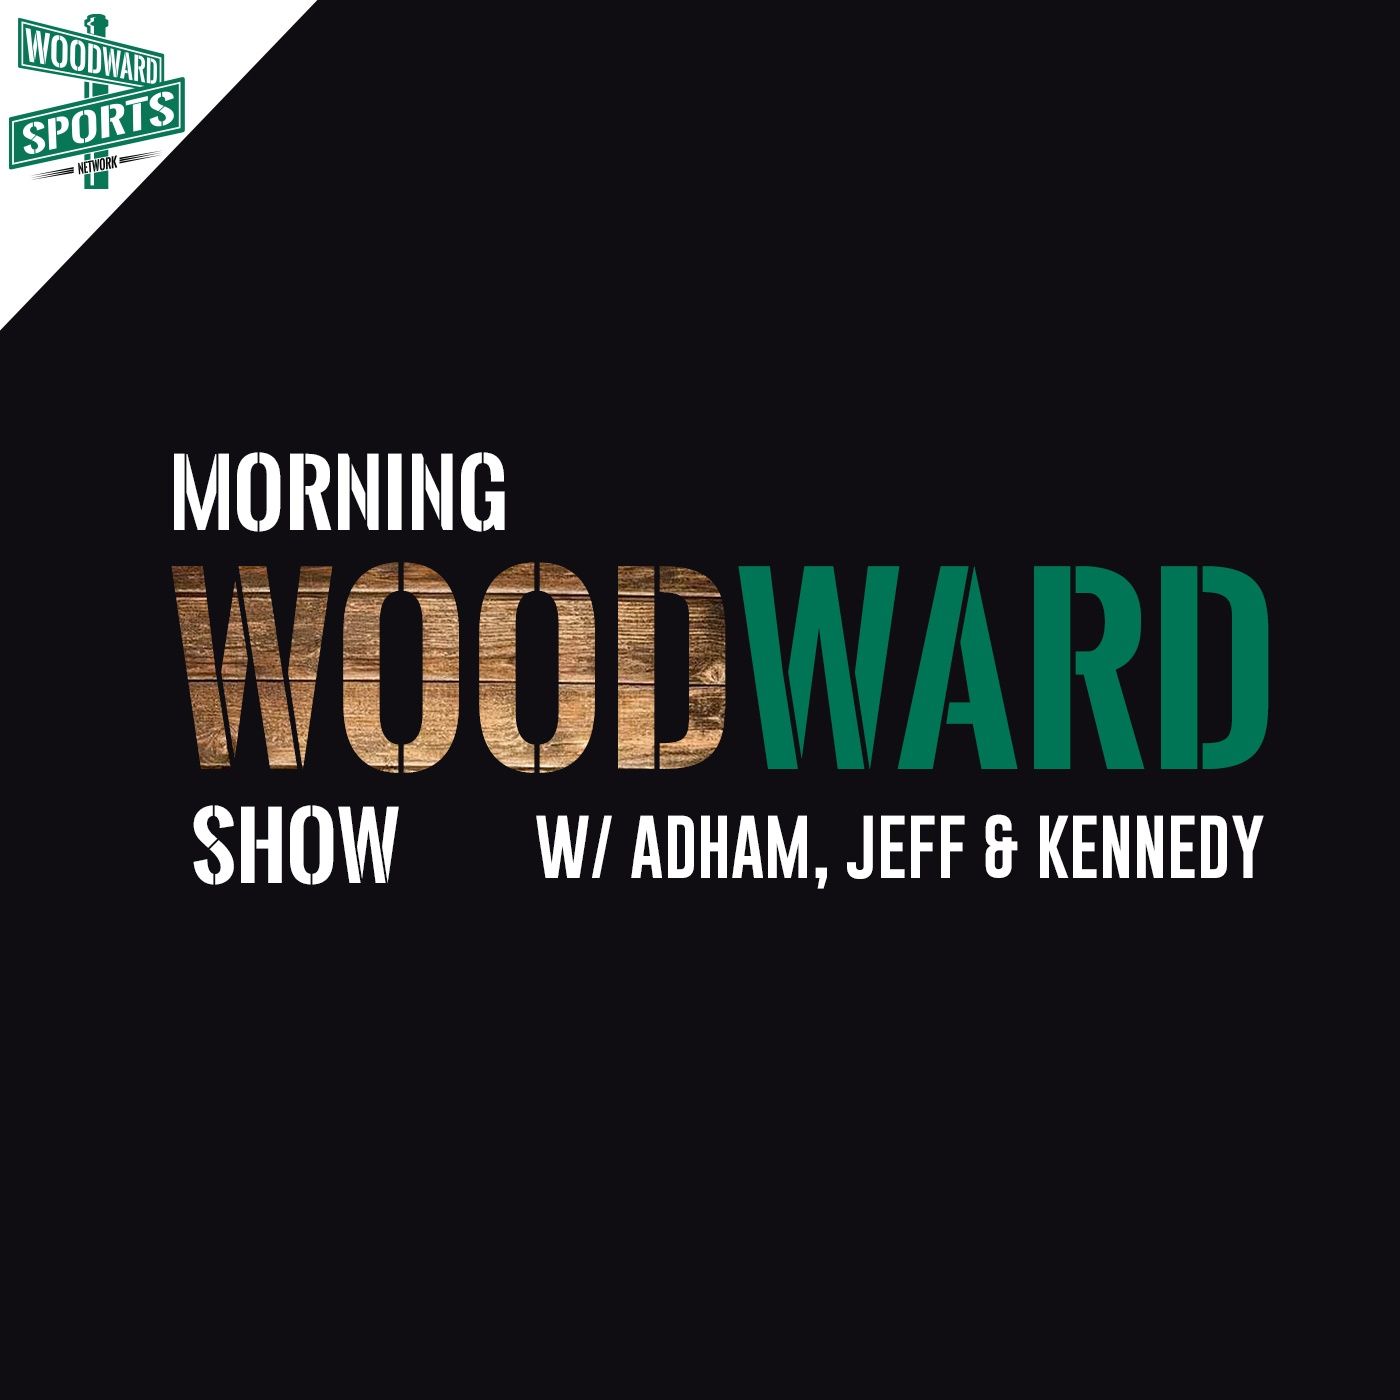 Lions fall short to Atlanta, Coaching Decisions, Stafford Top the NFC West | Morning Woodward Show